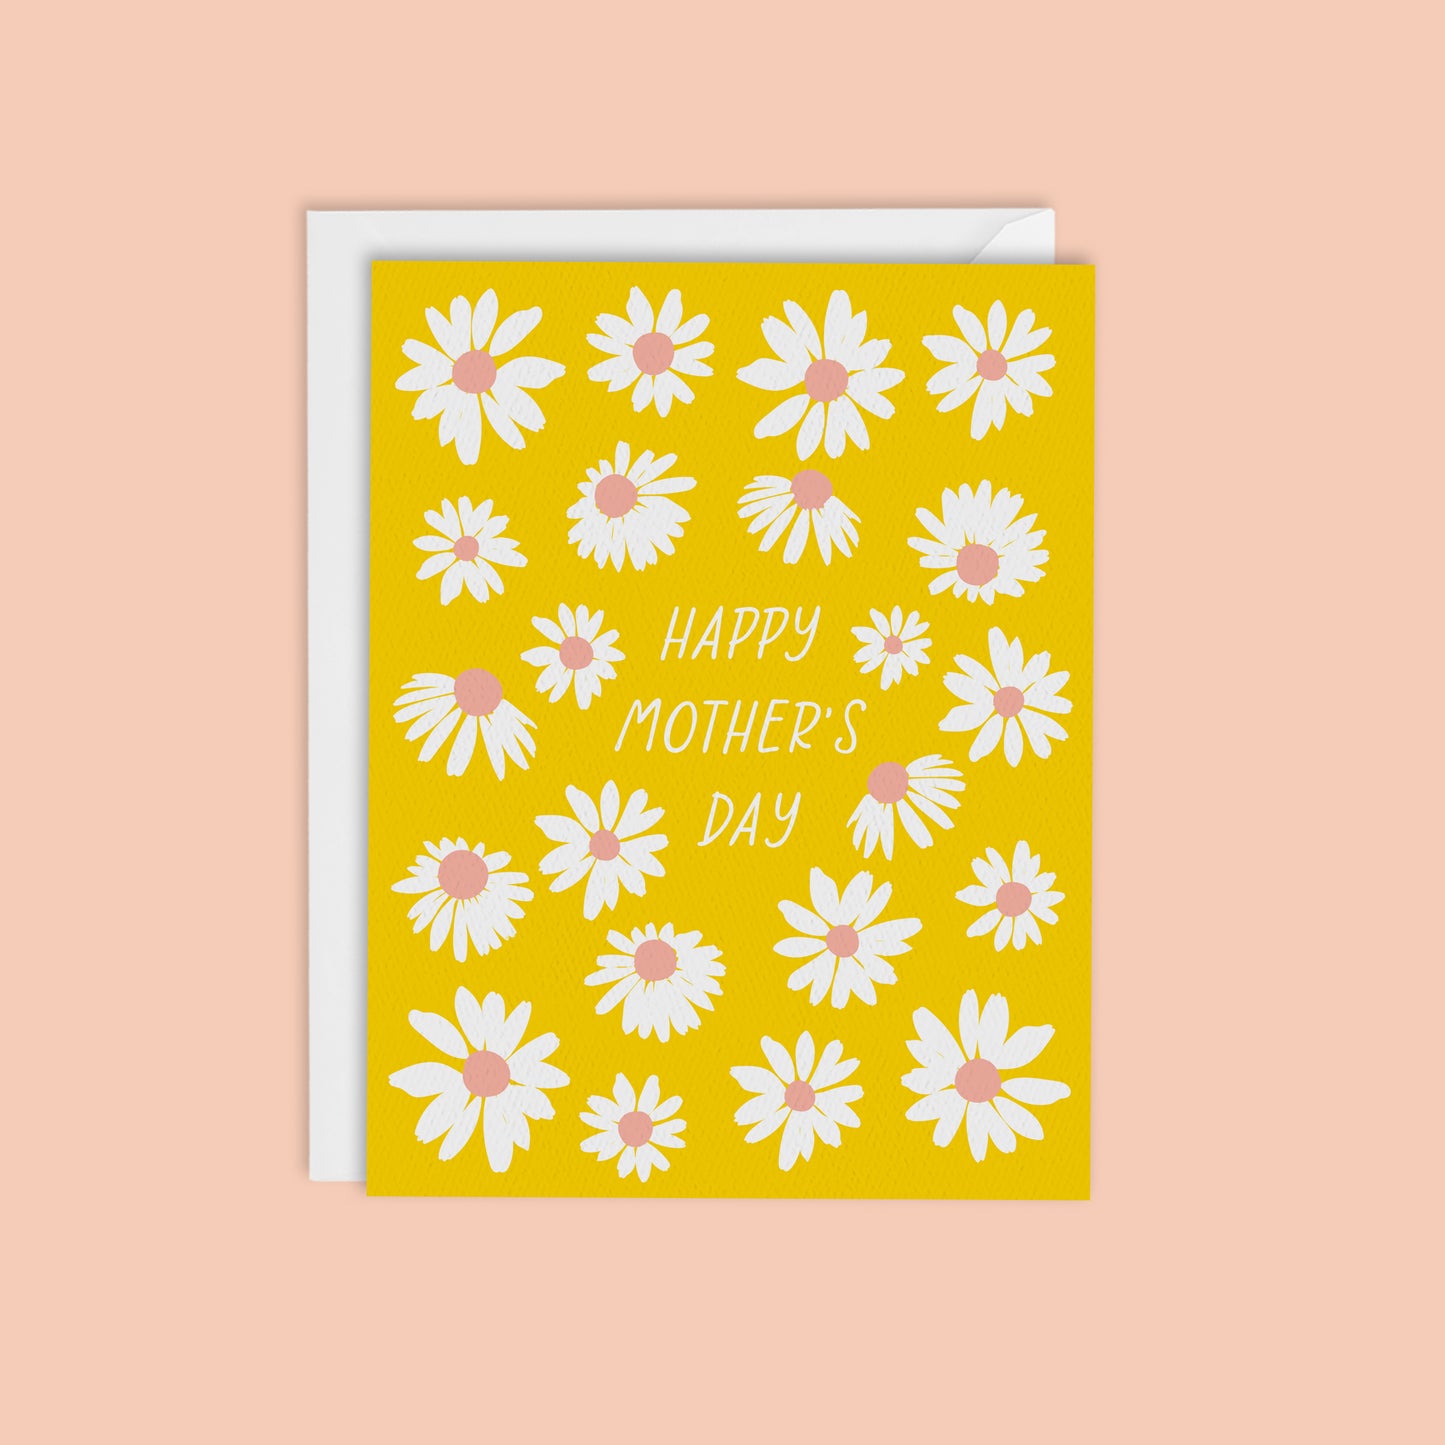 HAPPY MOTHERS DAY CARD - Mothers Day Flowers